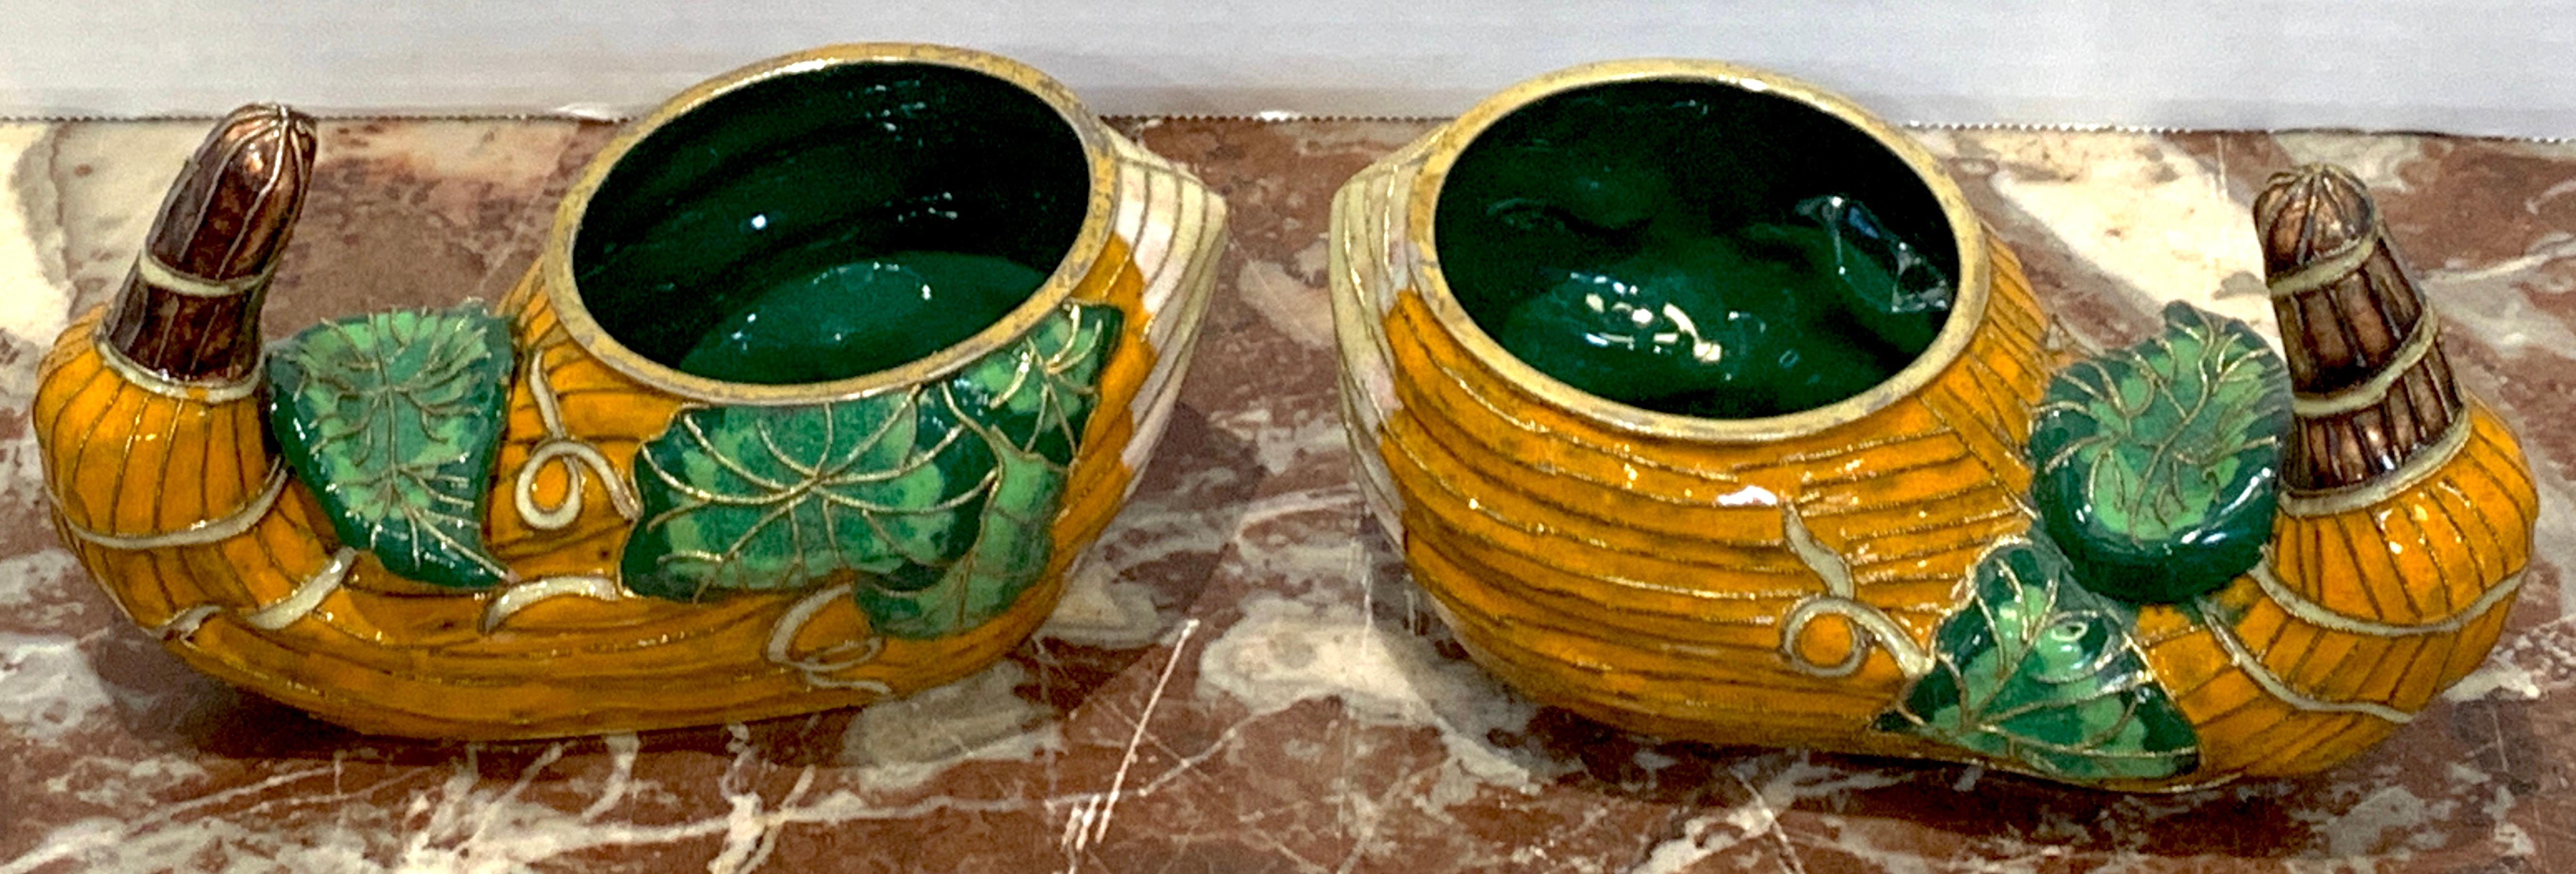 Pair of Chinese Export Enamel Gourd Cachepots In Good Condition For Sale In Atlanta, GA